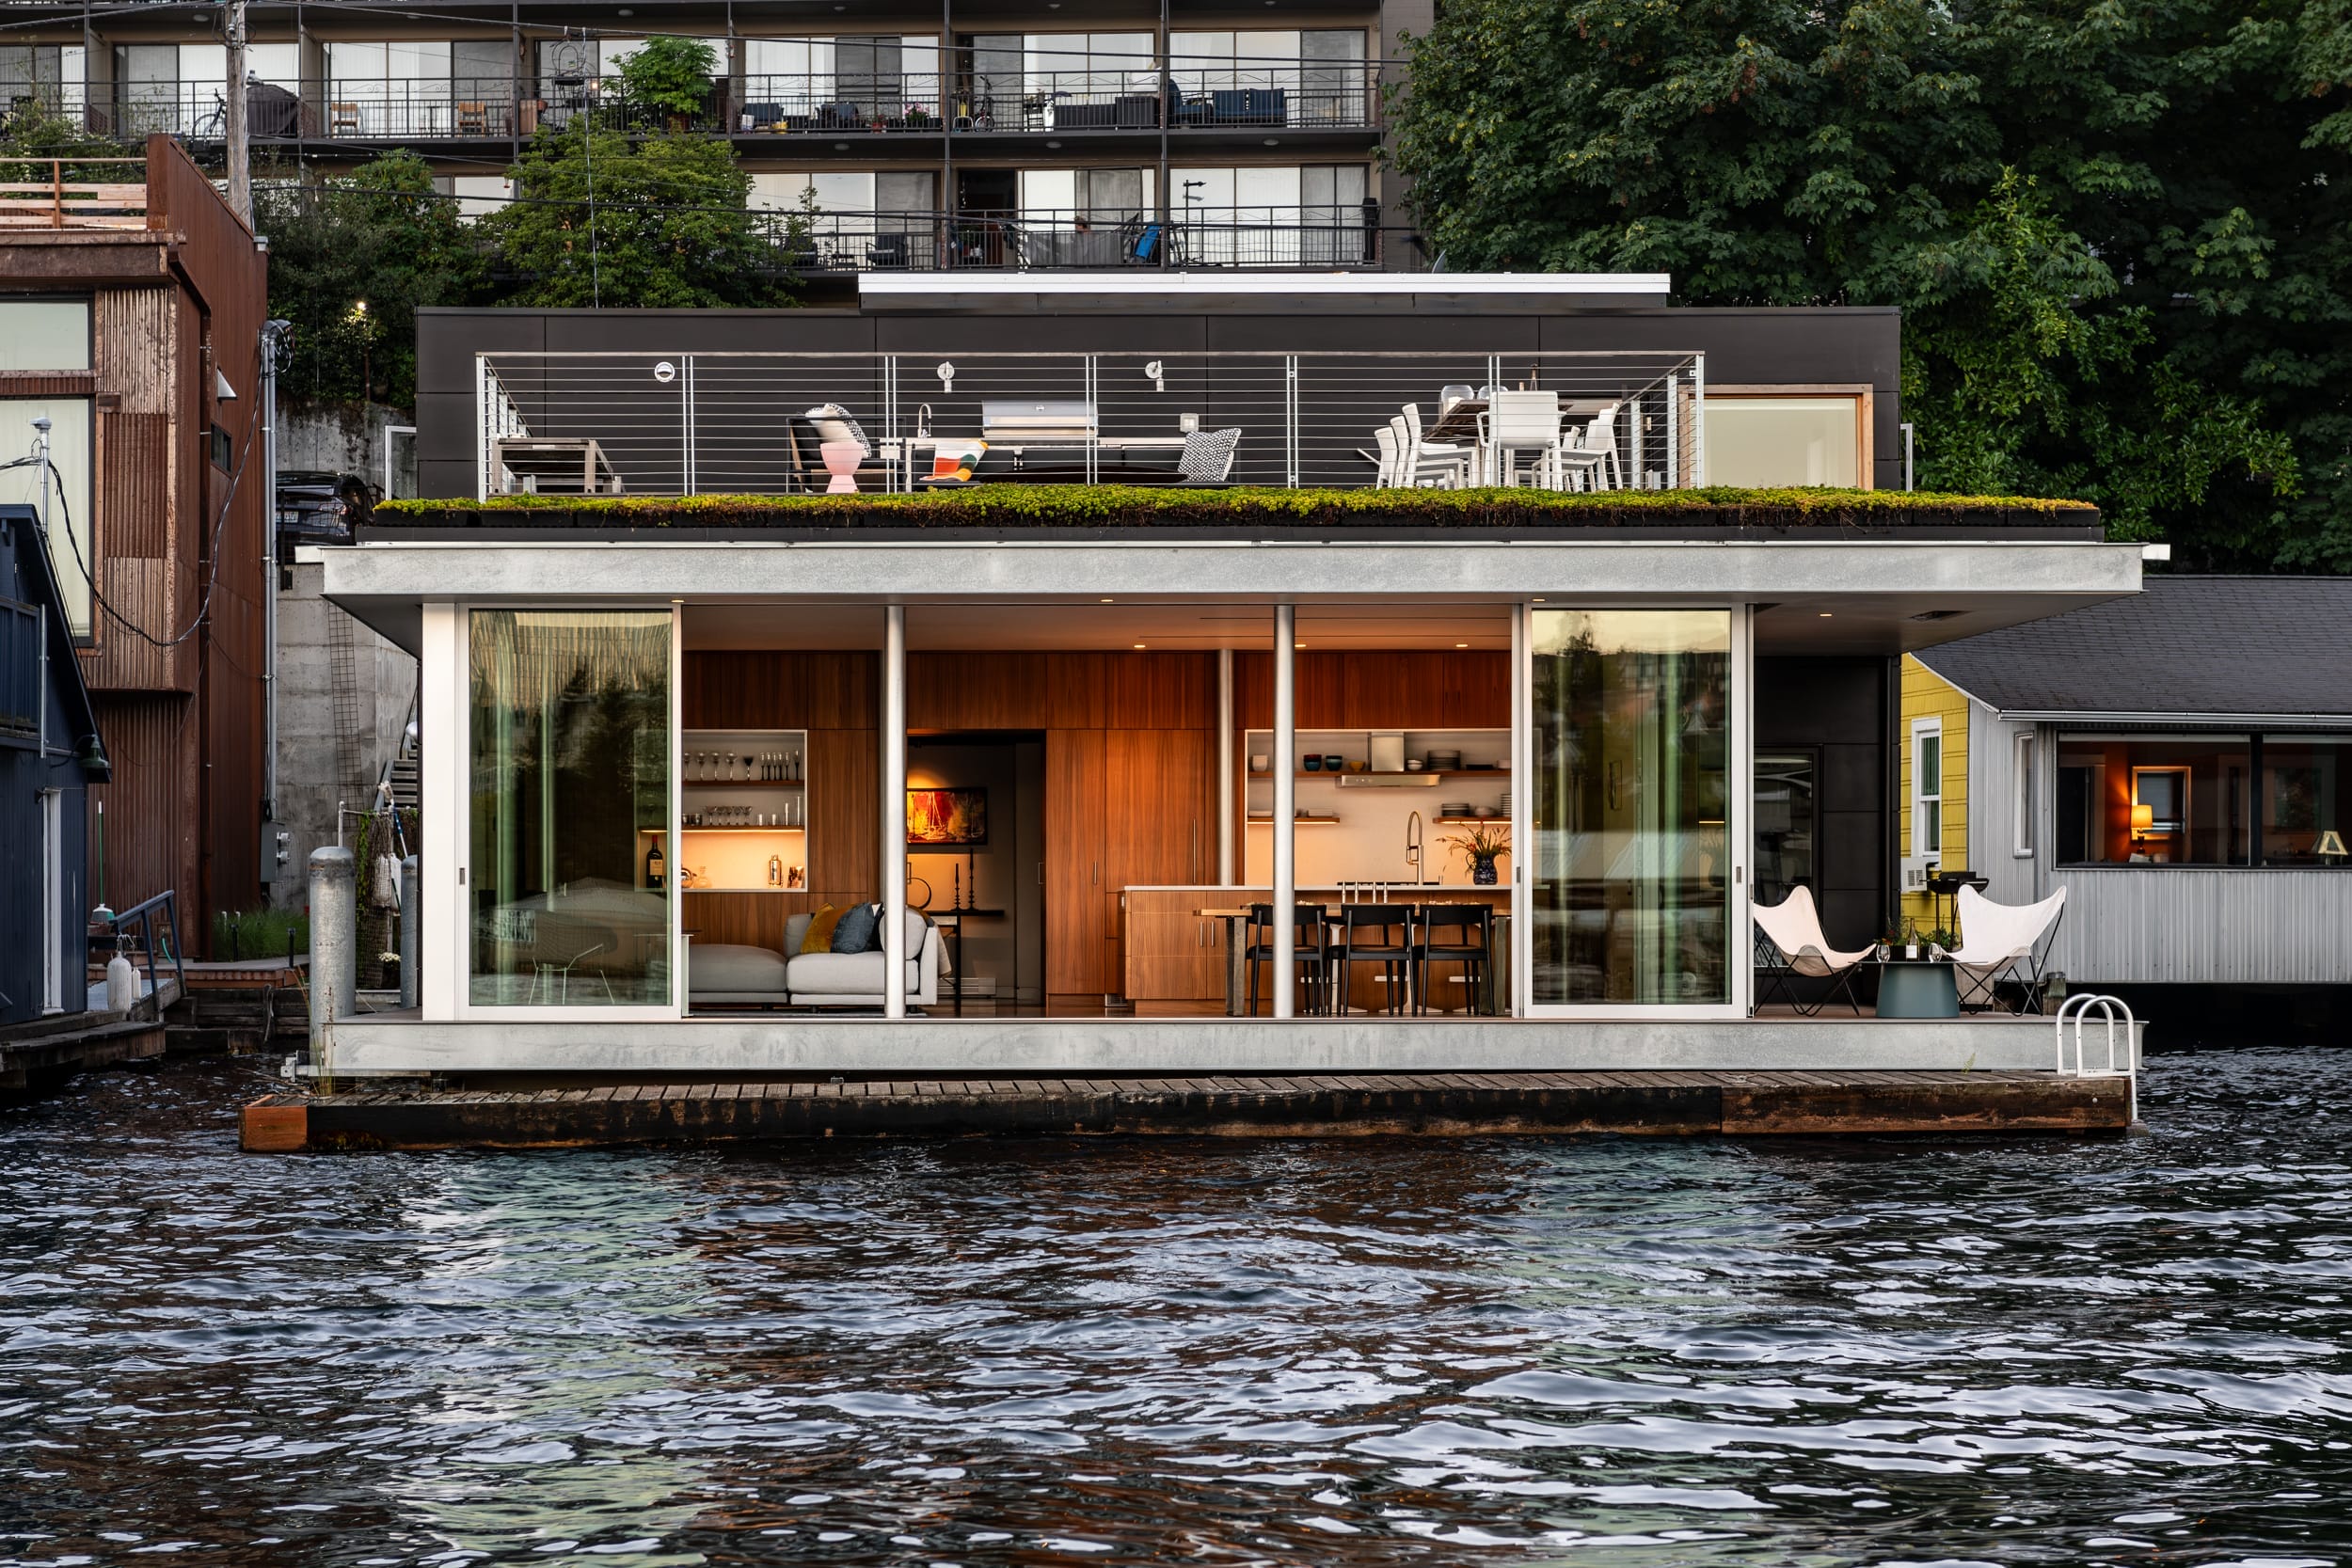 A house on a boat in a body of water.